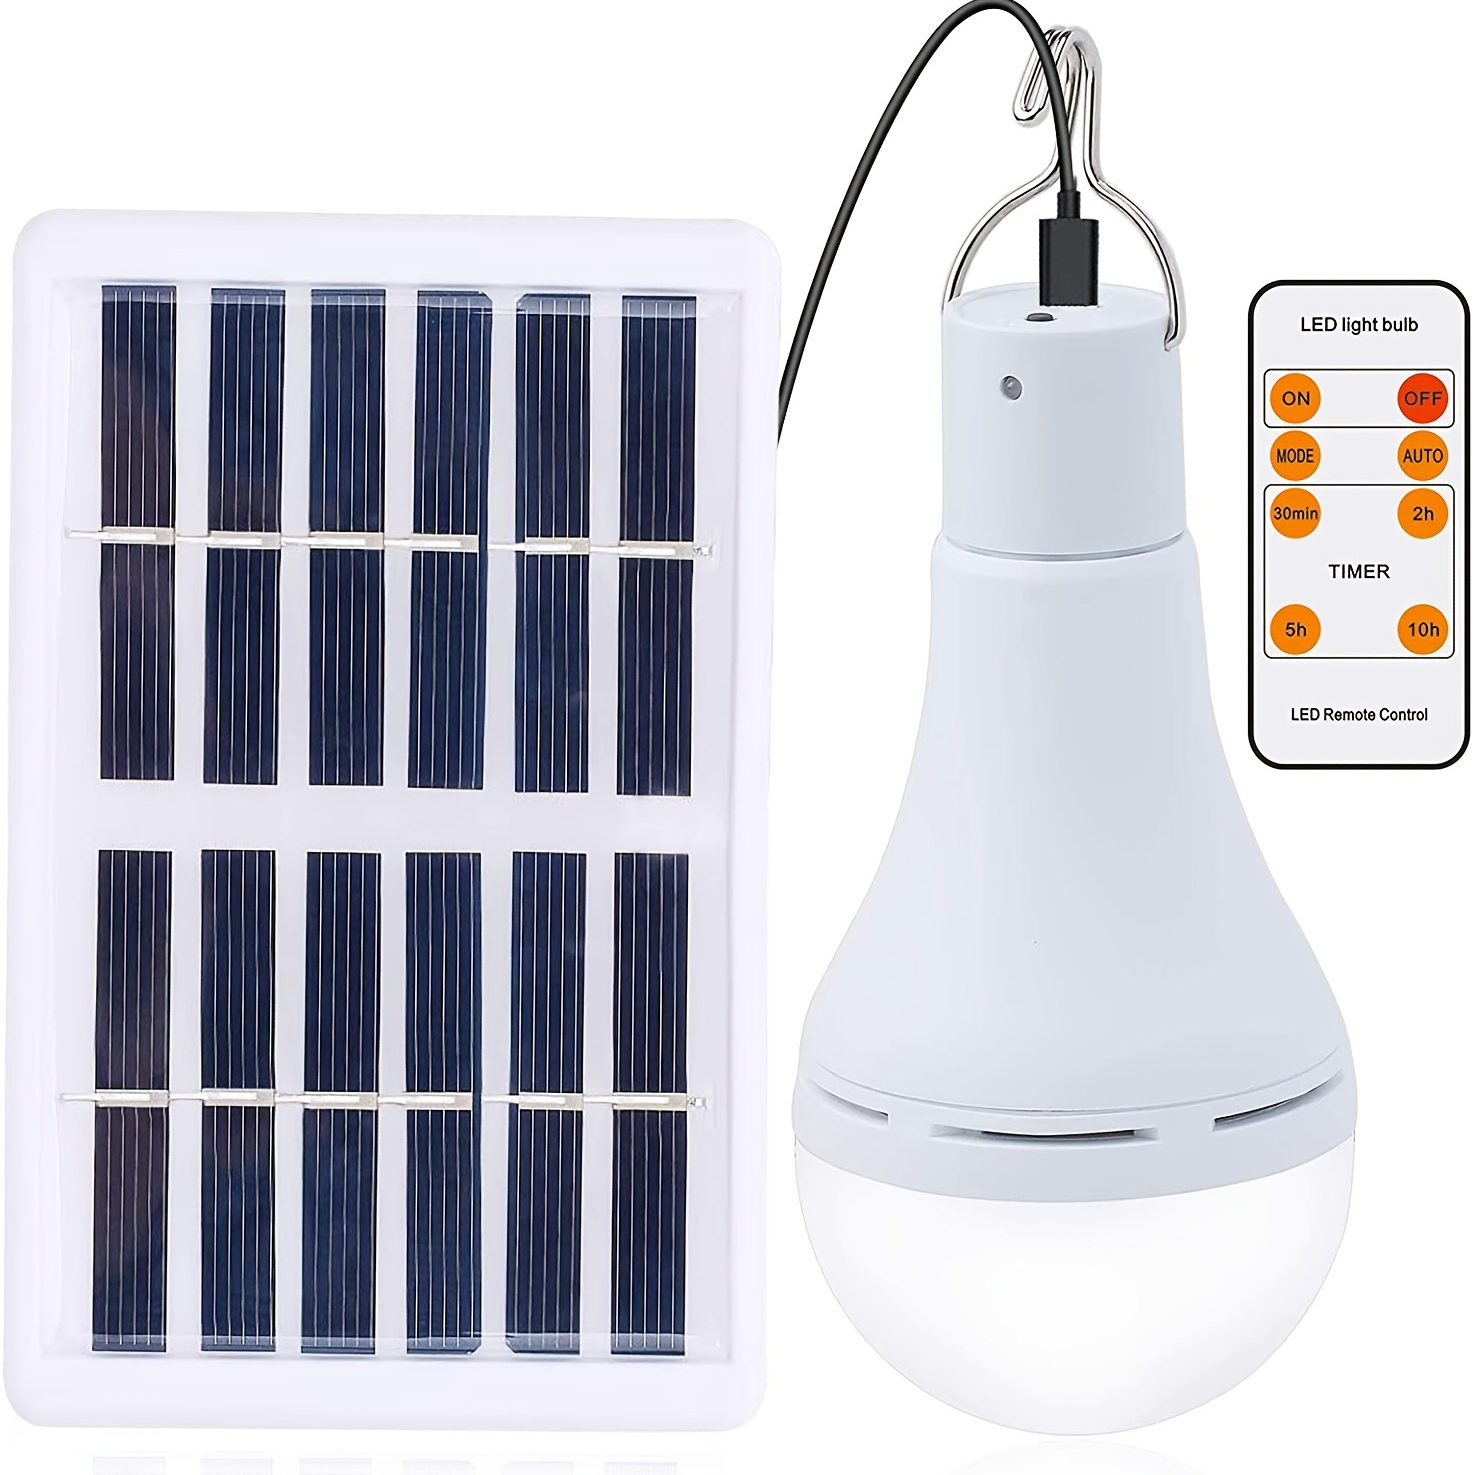 

1pc Led Solar Light Bulb, Outdoor Light Bulb With Remote & Timer, For Chicken Coops Shed Hiking Camping Tent Hurricane Emergency Lighting